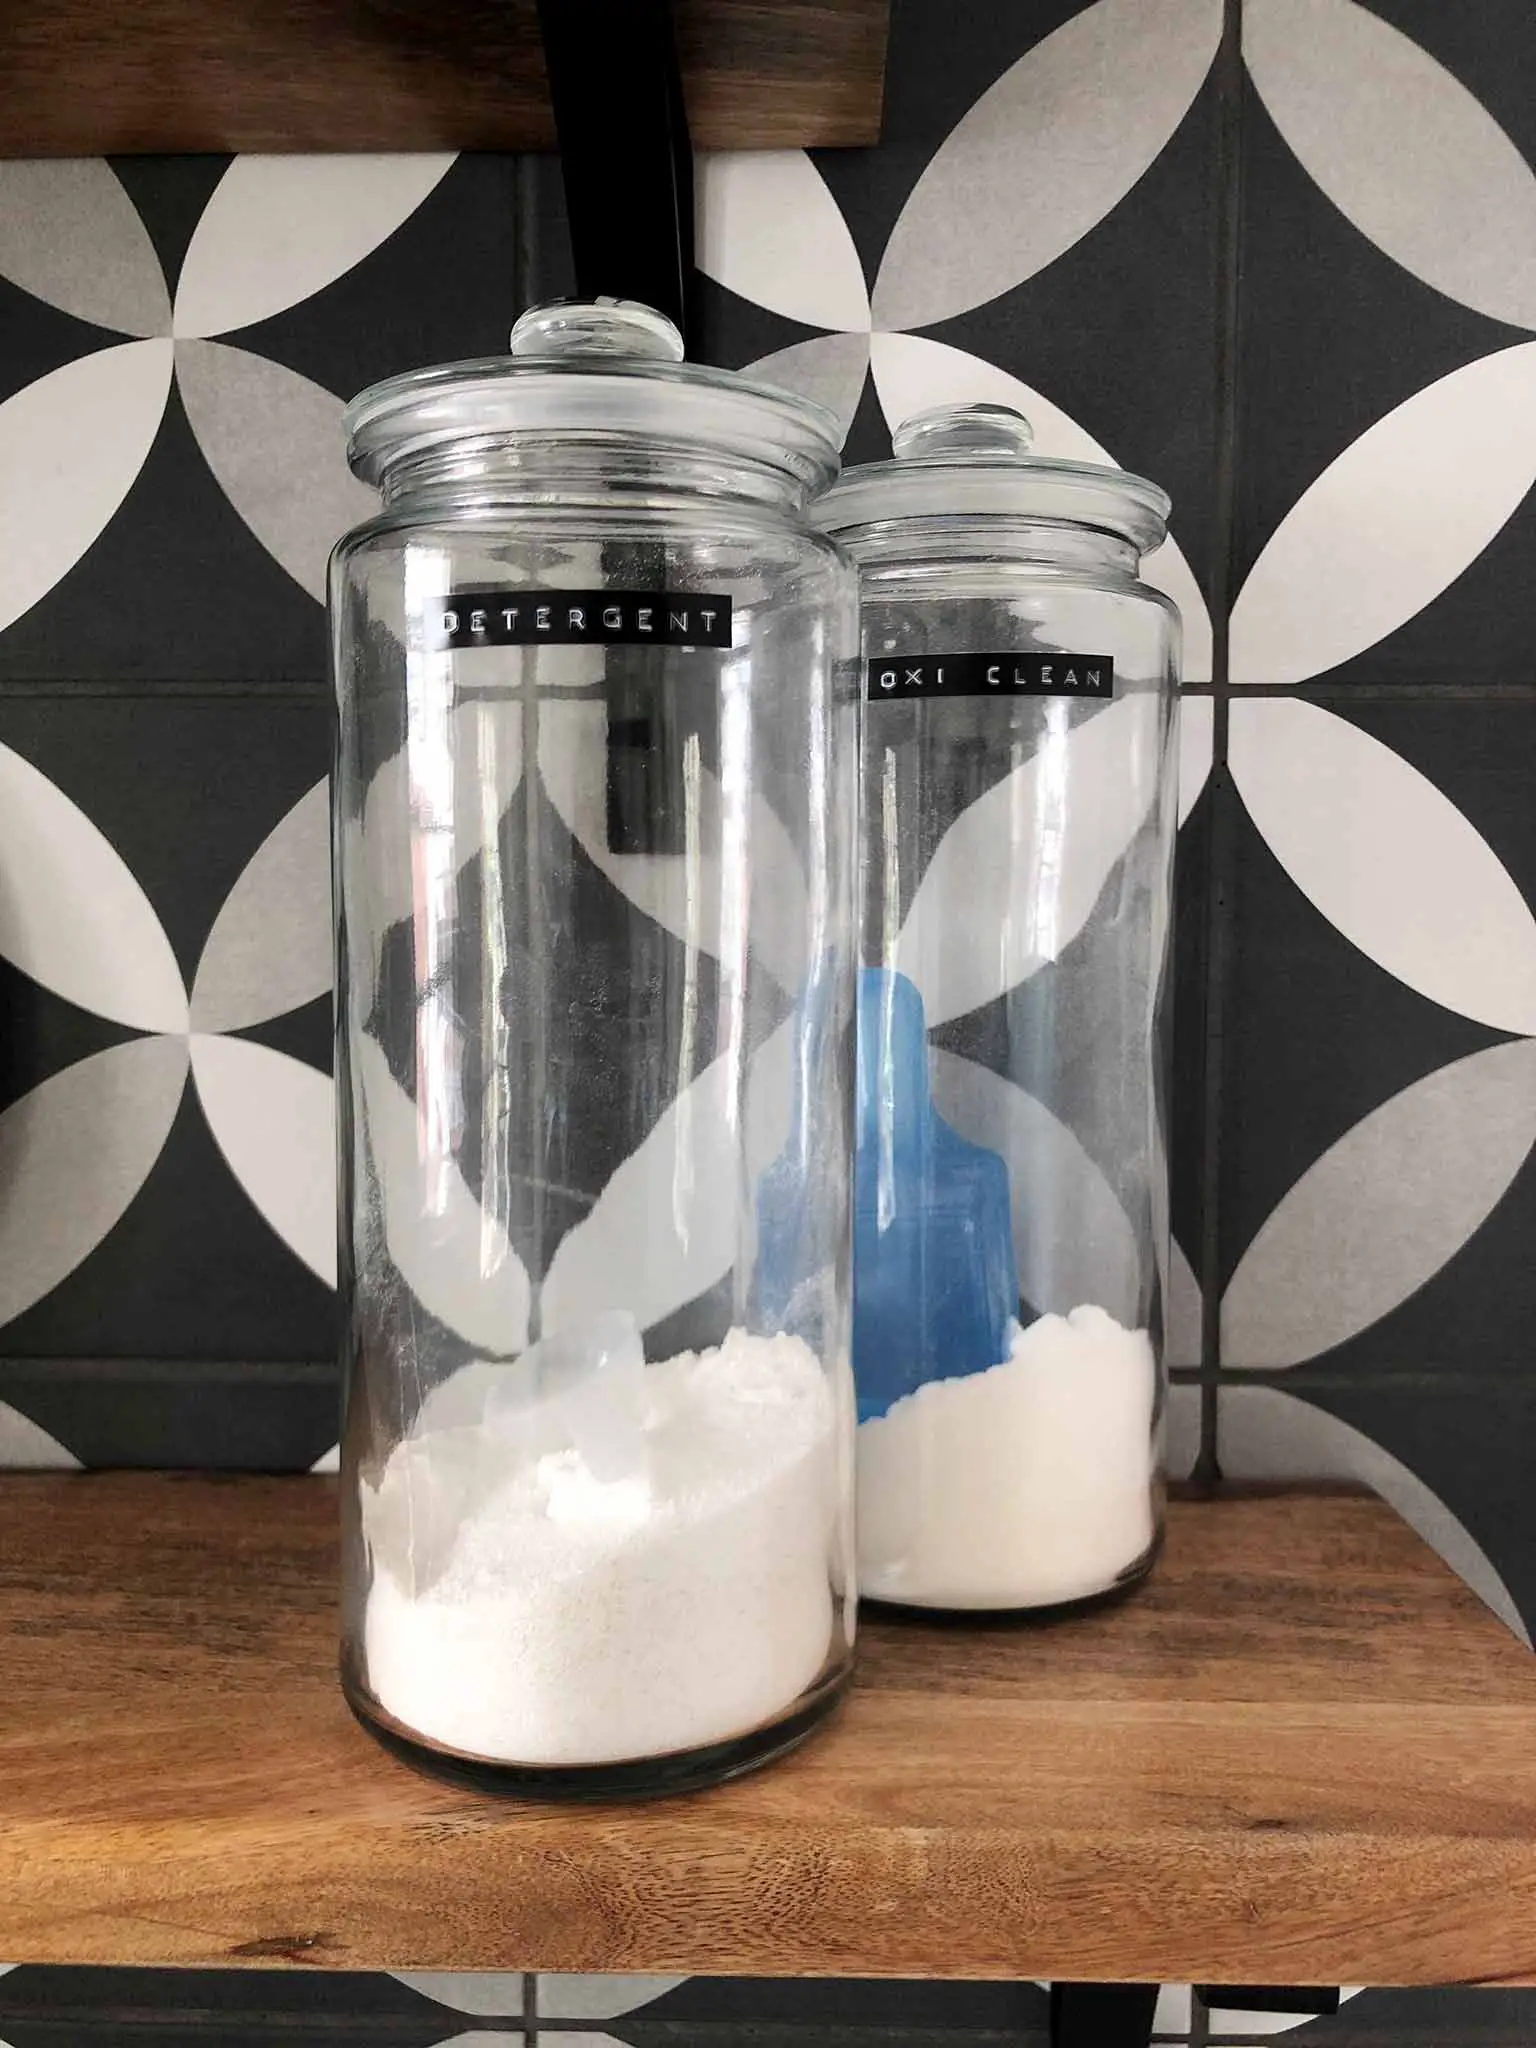 Using a label maker to organize your laundry detergent - That Homebird Life Blog